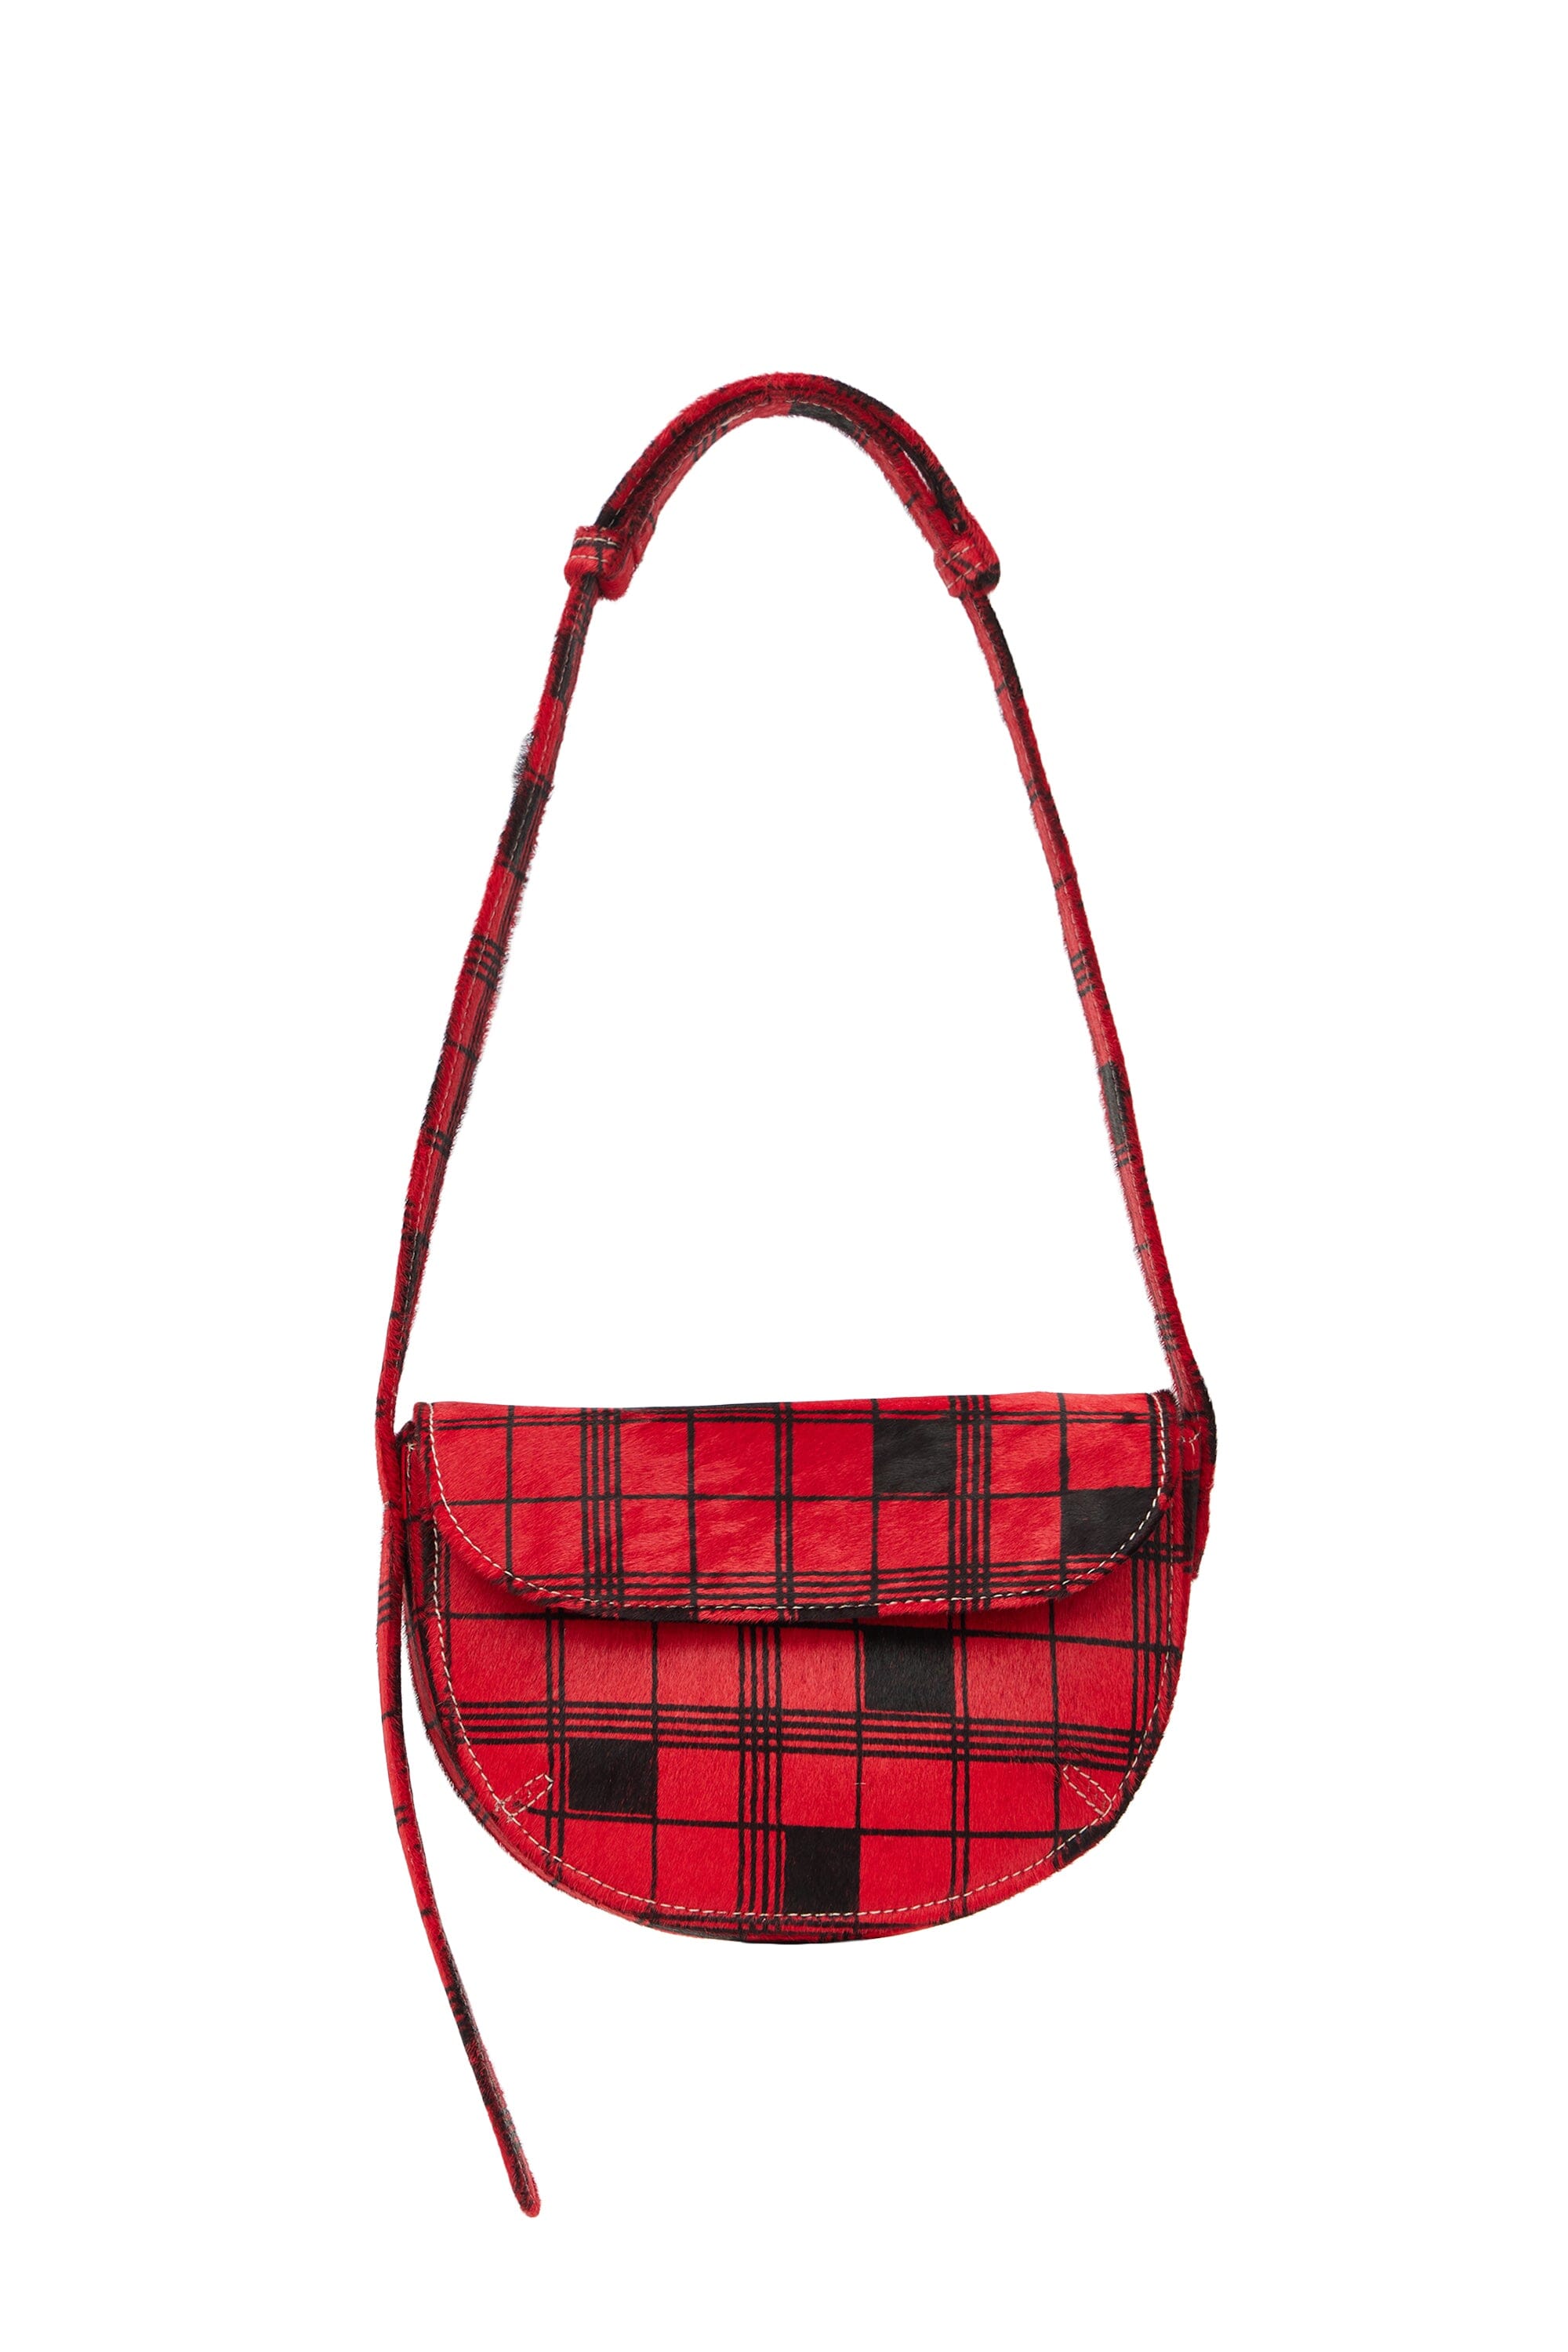 Billie Bag in Checkered Leather